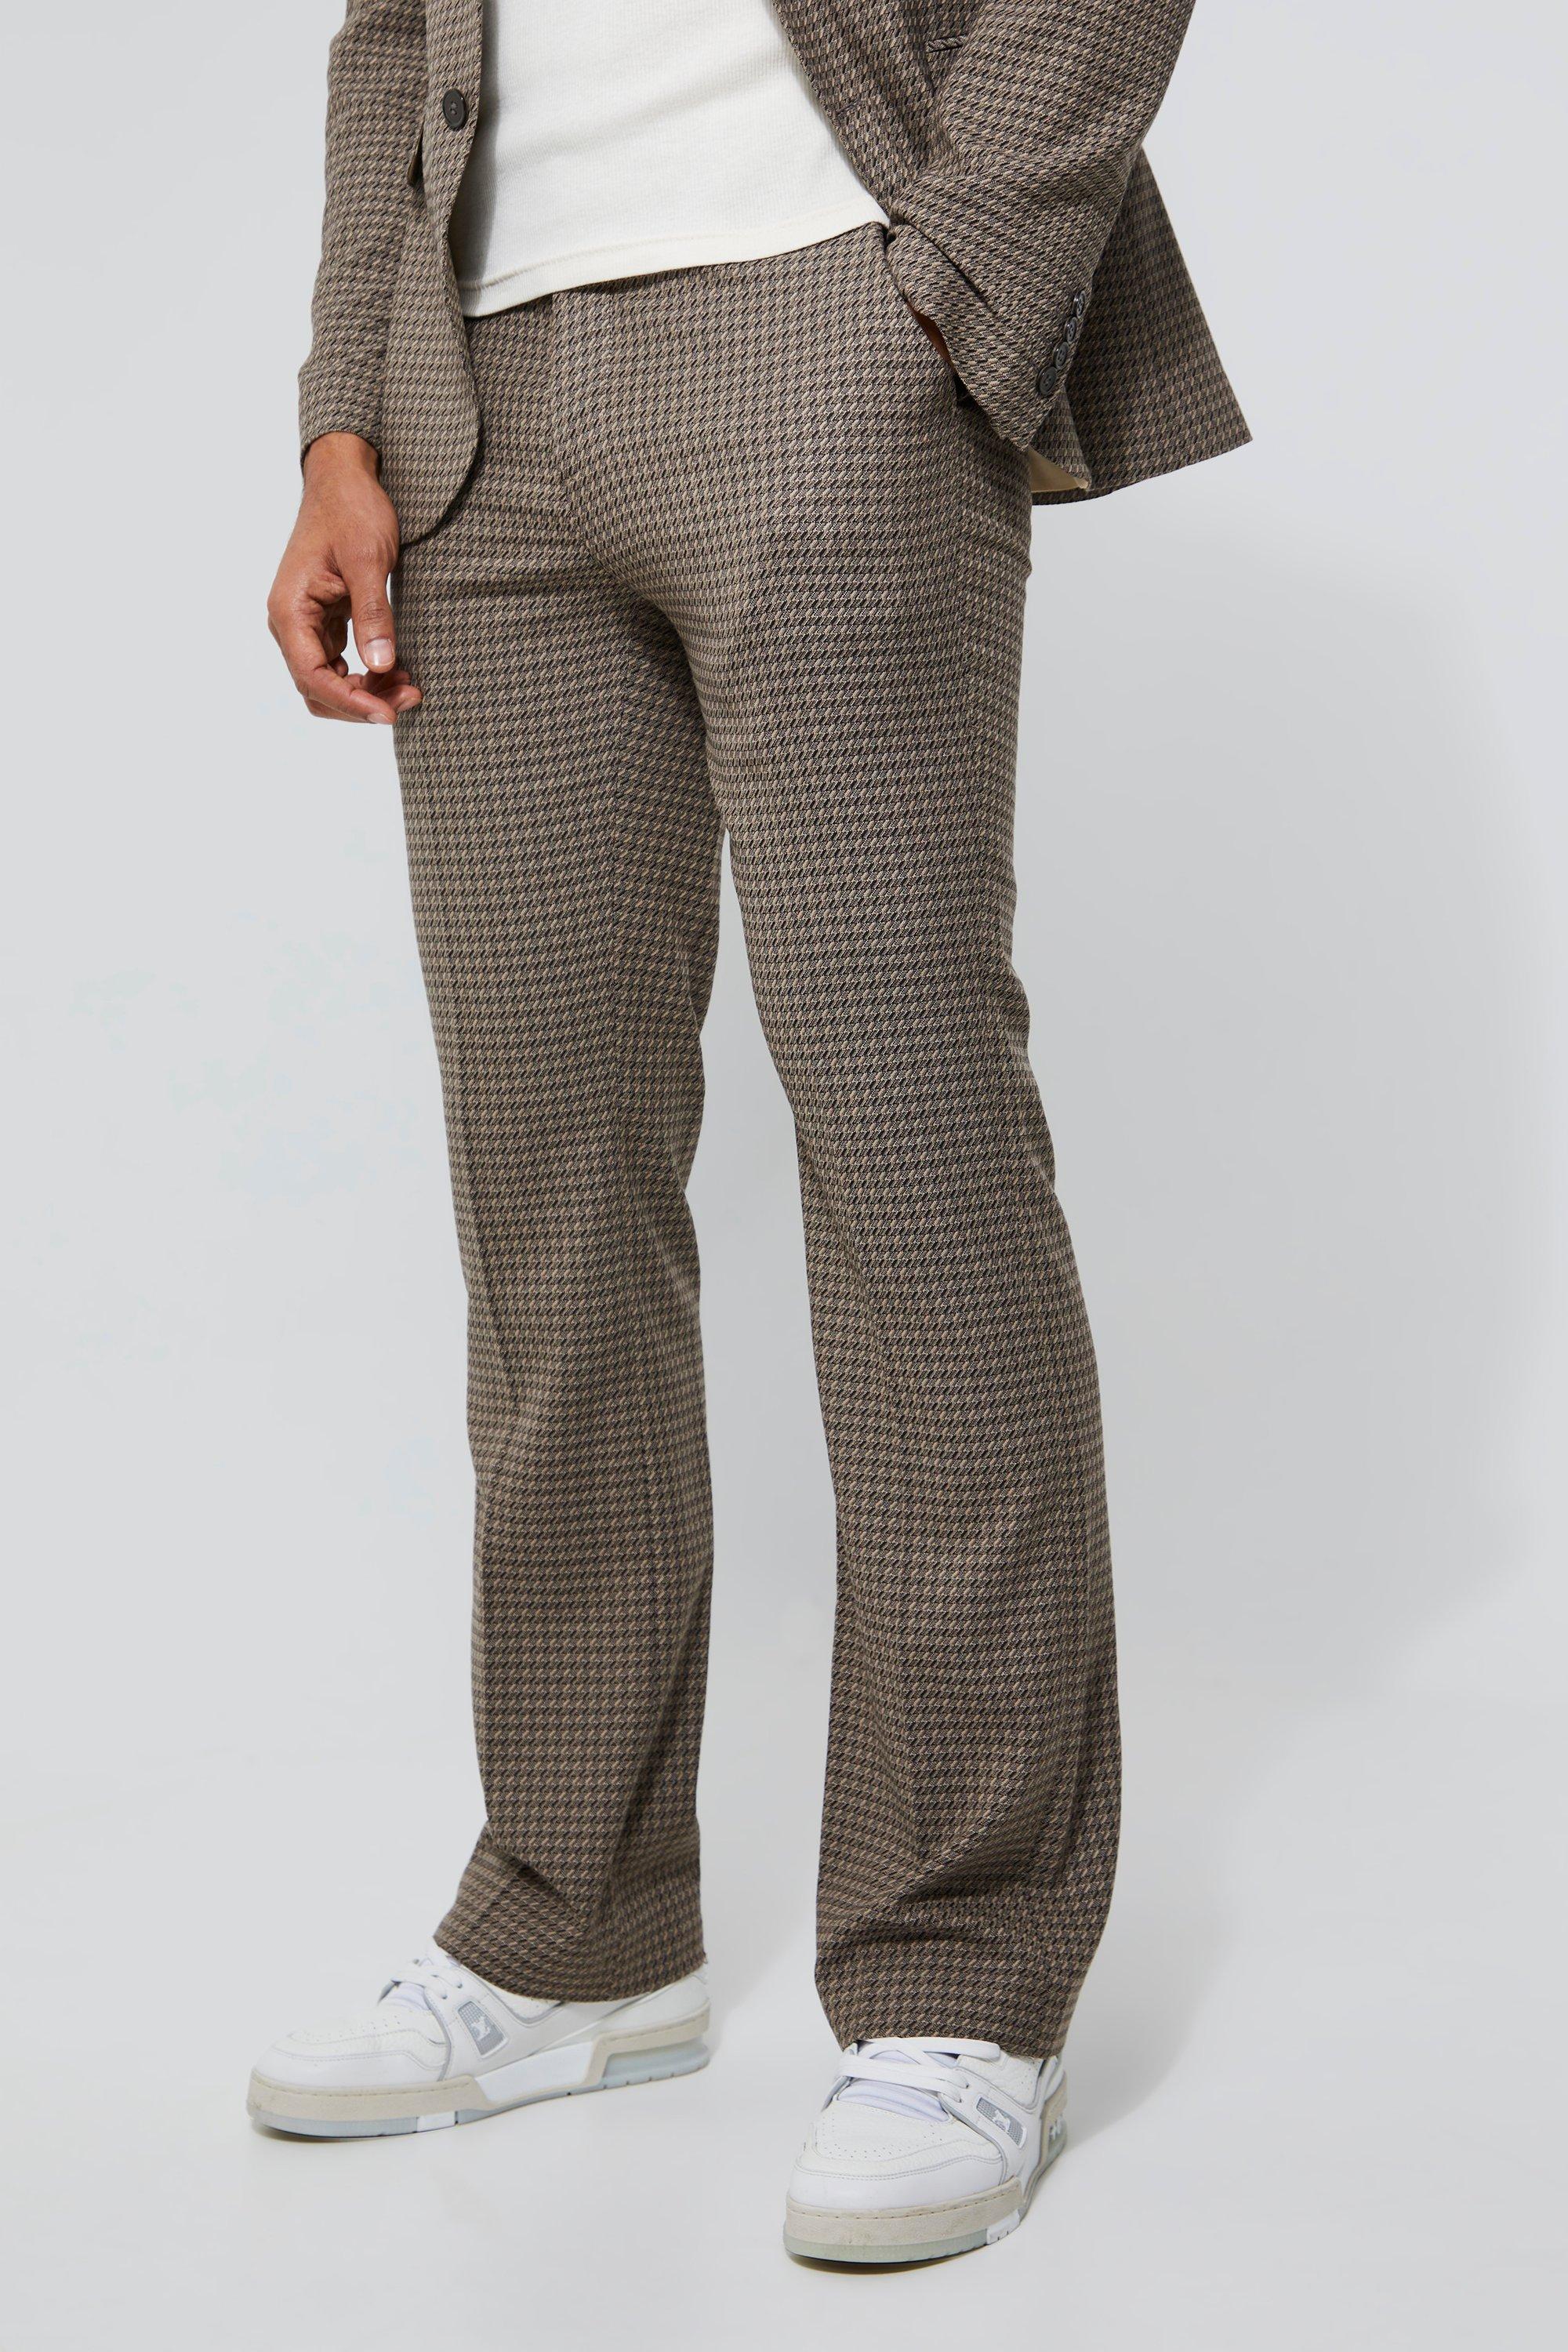 Toosii Slim Flare Leg Dogstooth Suit Trousers, Brown